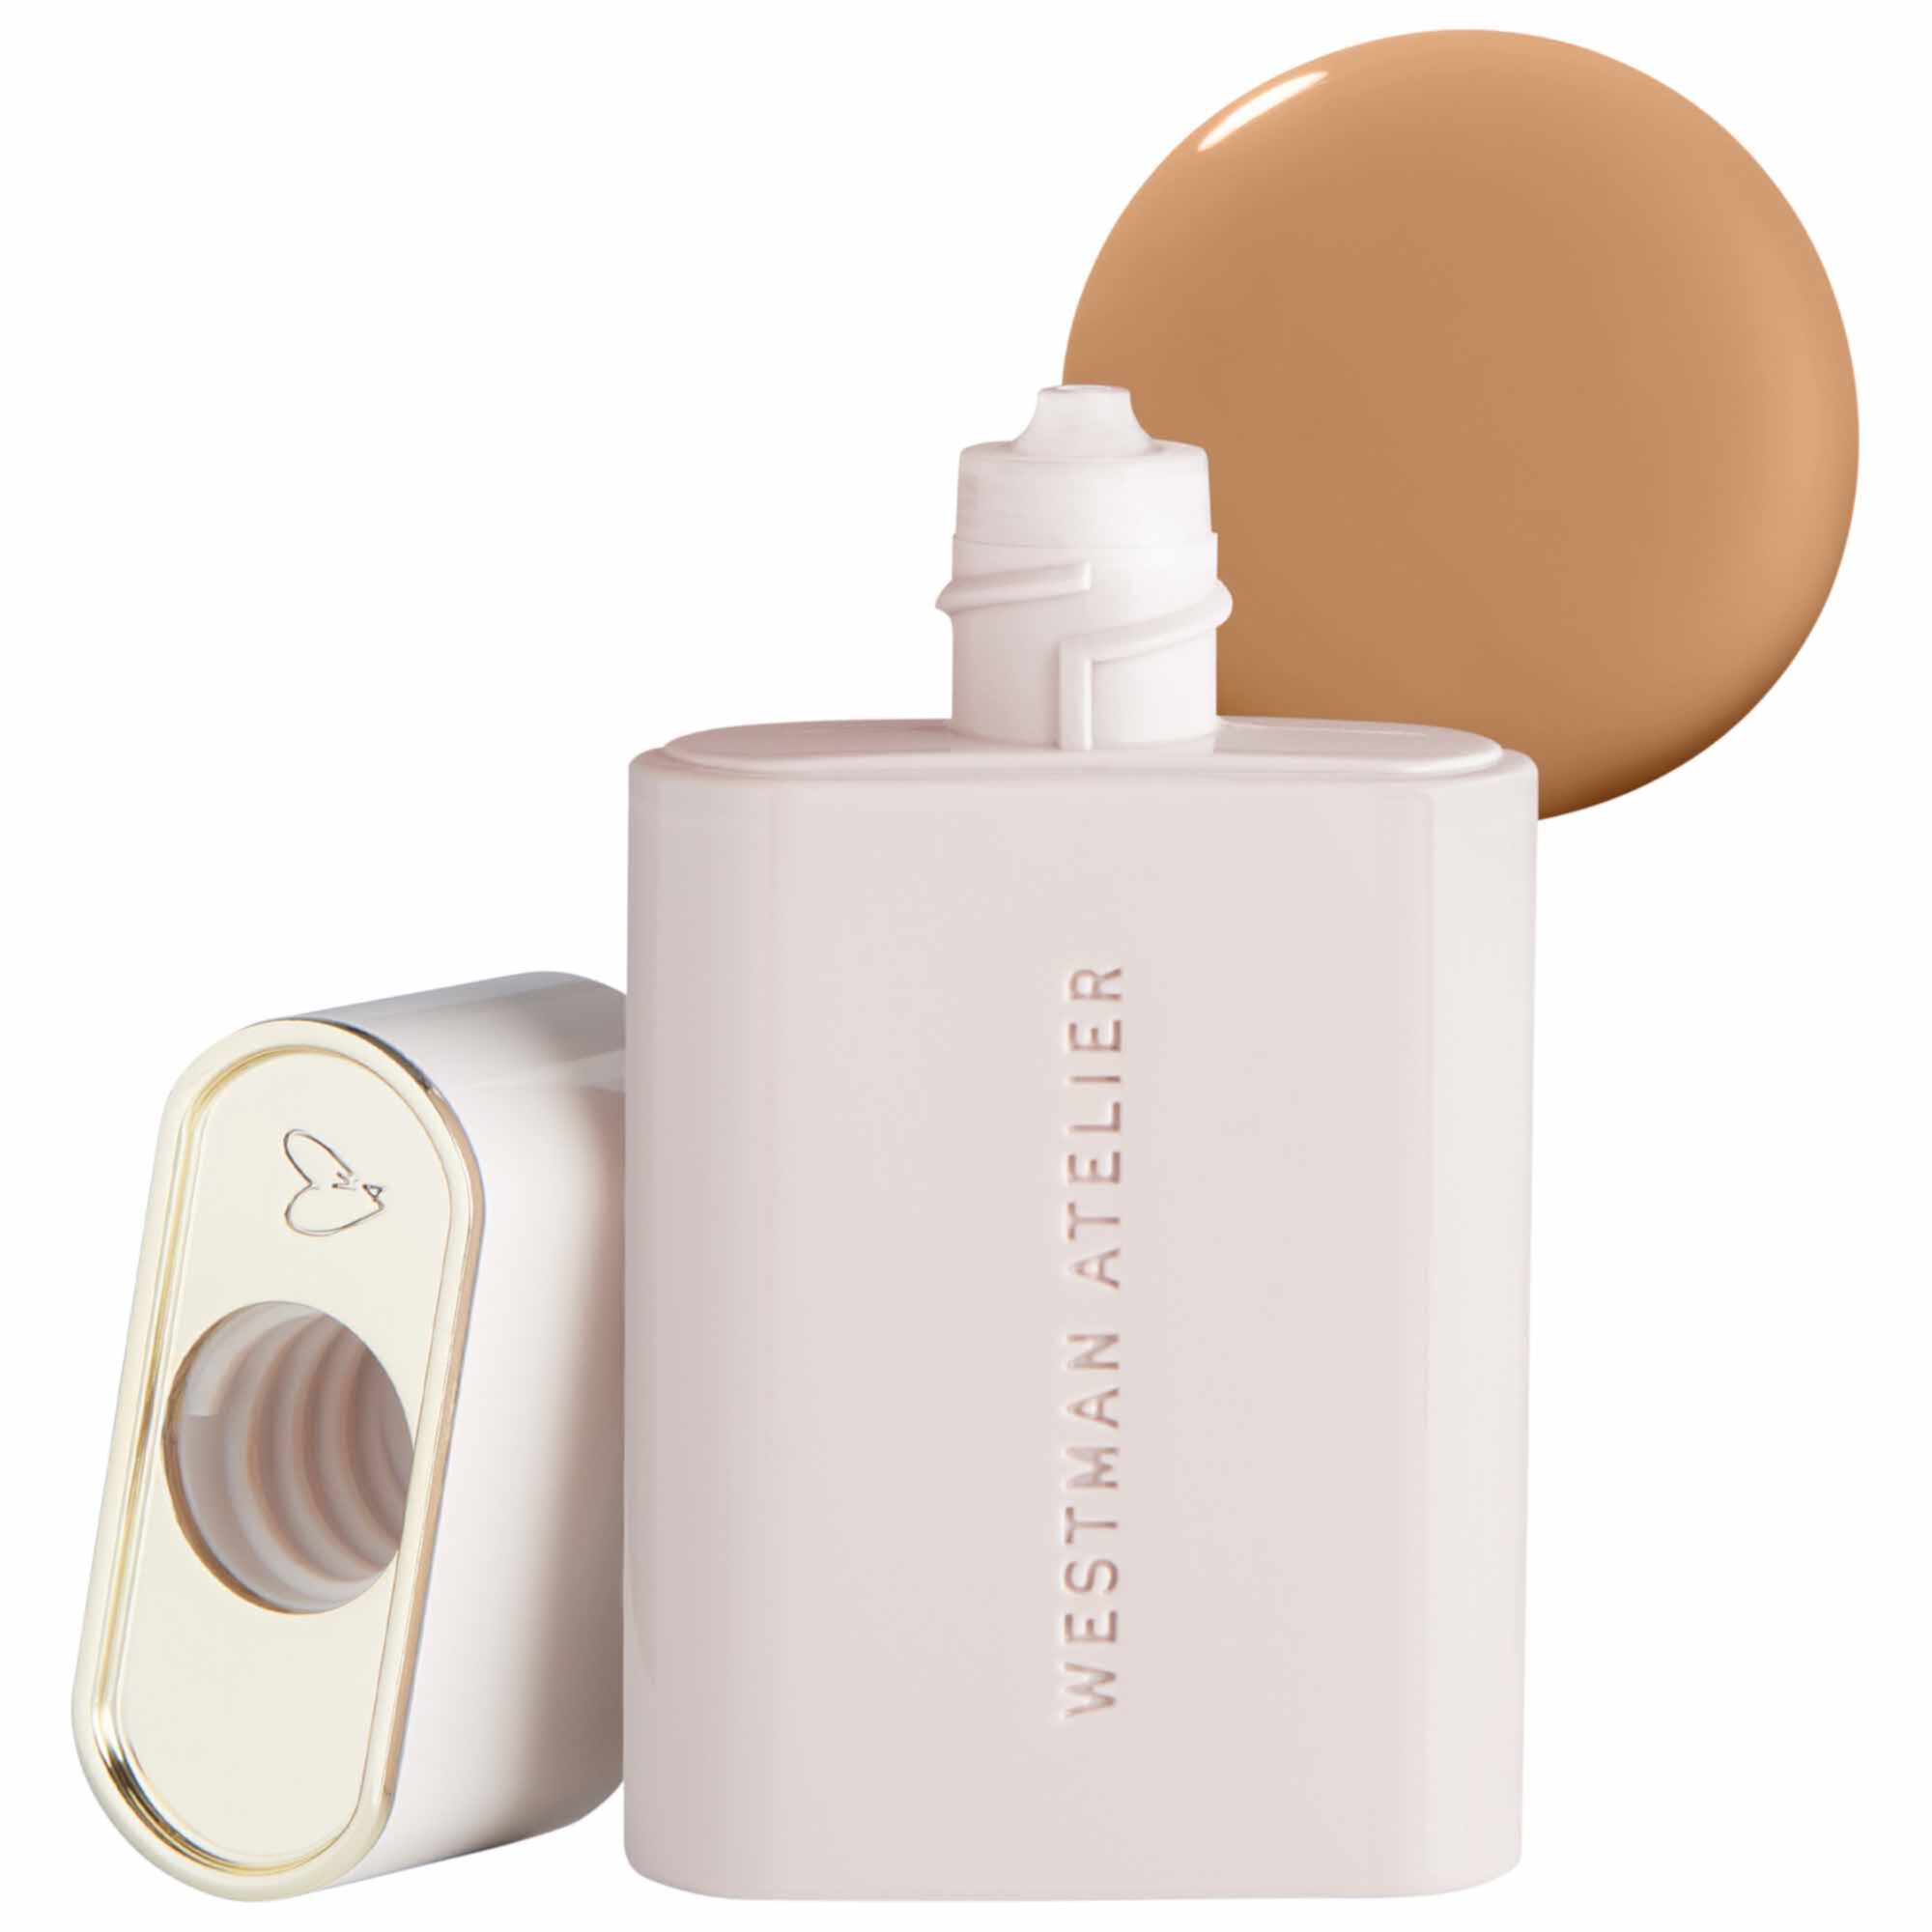 Vital Skincare Complexion Drops Dewy Skin Tint Westman Atelier